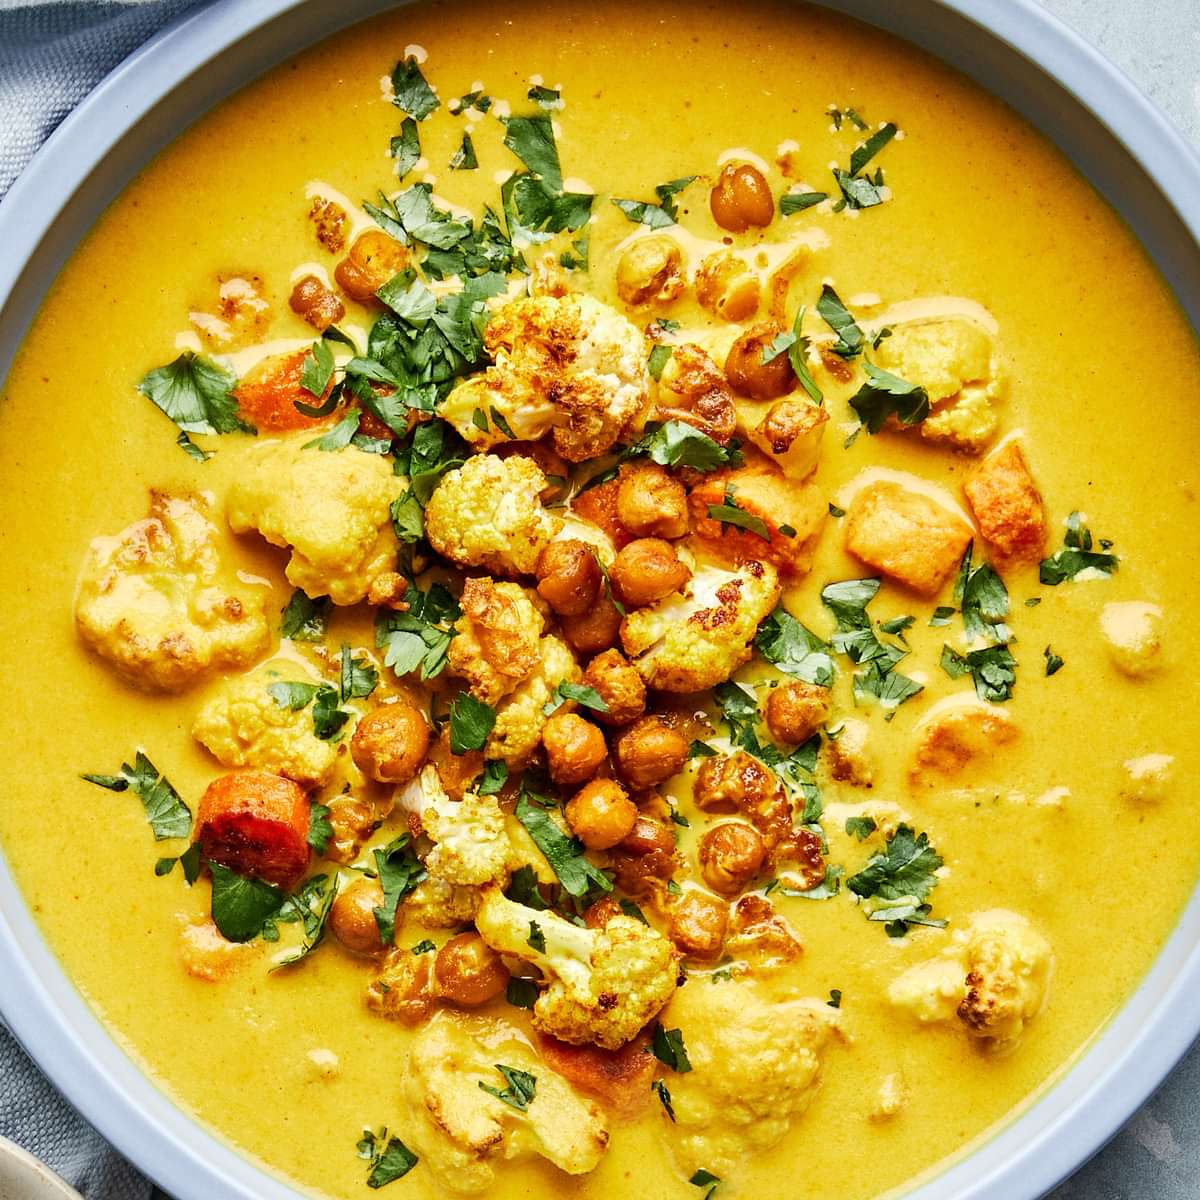 a bowl of homemade golden soup made with carrots, chickpeas, cauliflower, turmeric, ginger and coconut milk